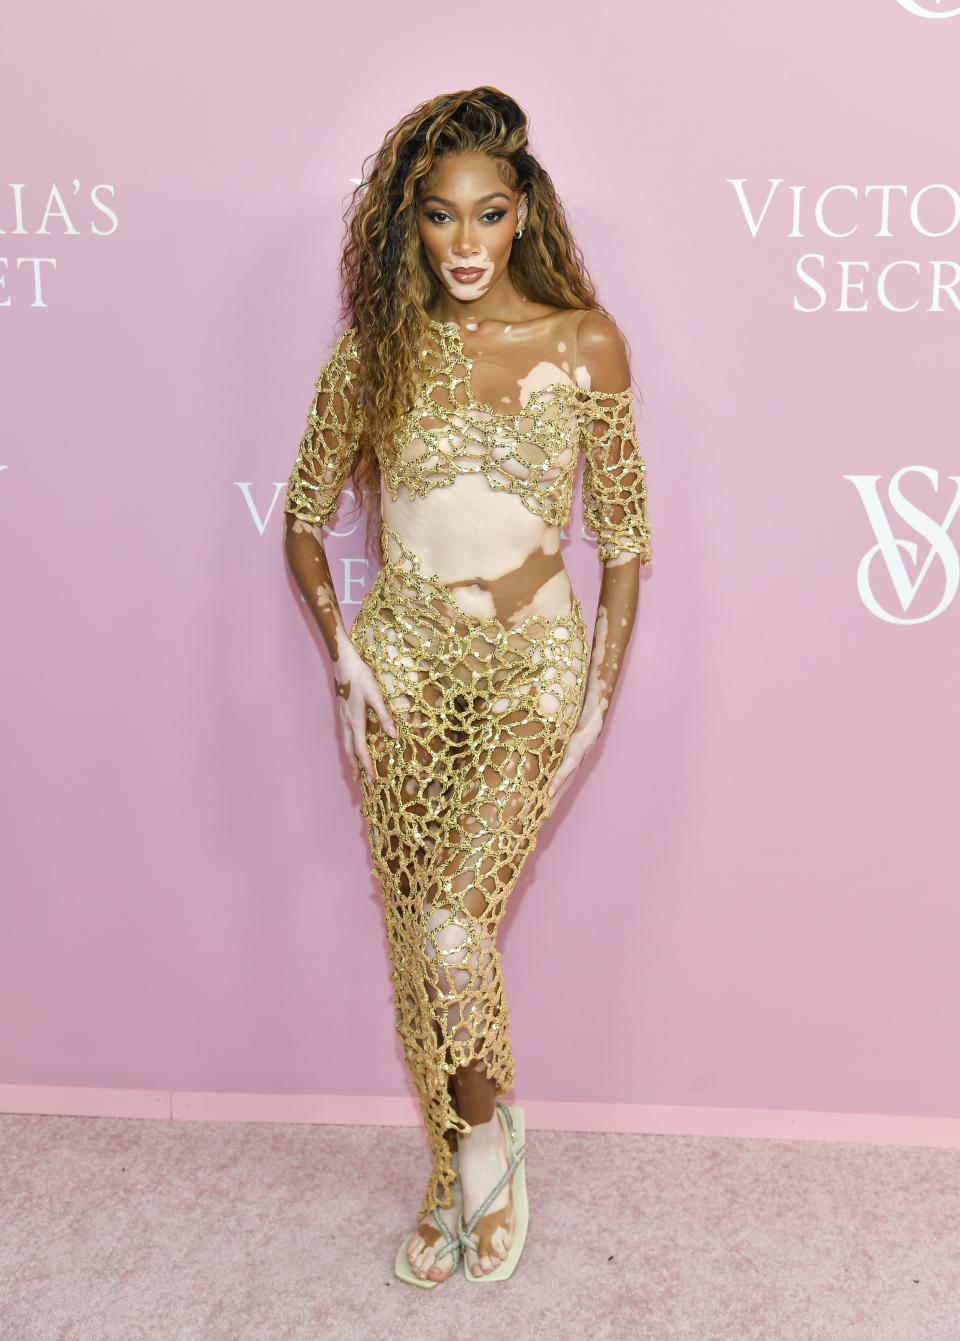 File - Winnie Harlow attends the Victoria's Secret "The Tour '23" event on Wednesday, Sept. 6, 2023 in New York. Harlow wears a crocheted look by Melissa Valdes Duque, a 24-year-old designer from Bogota, Columbia. (Photo by Evan Agostini/Invision/AP, File)